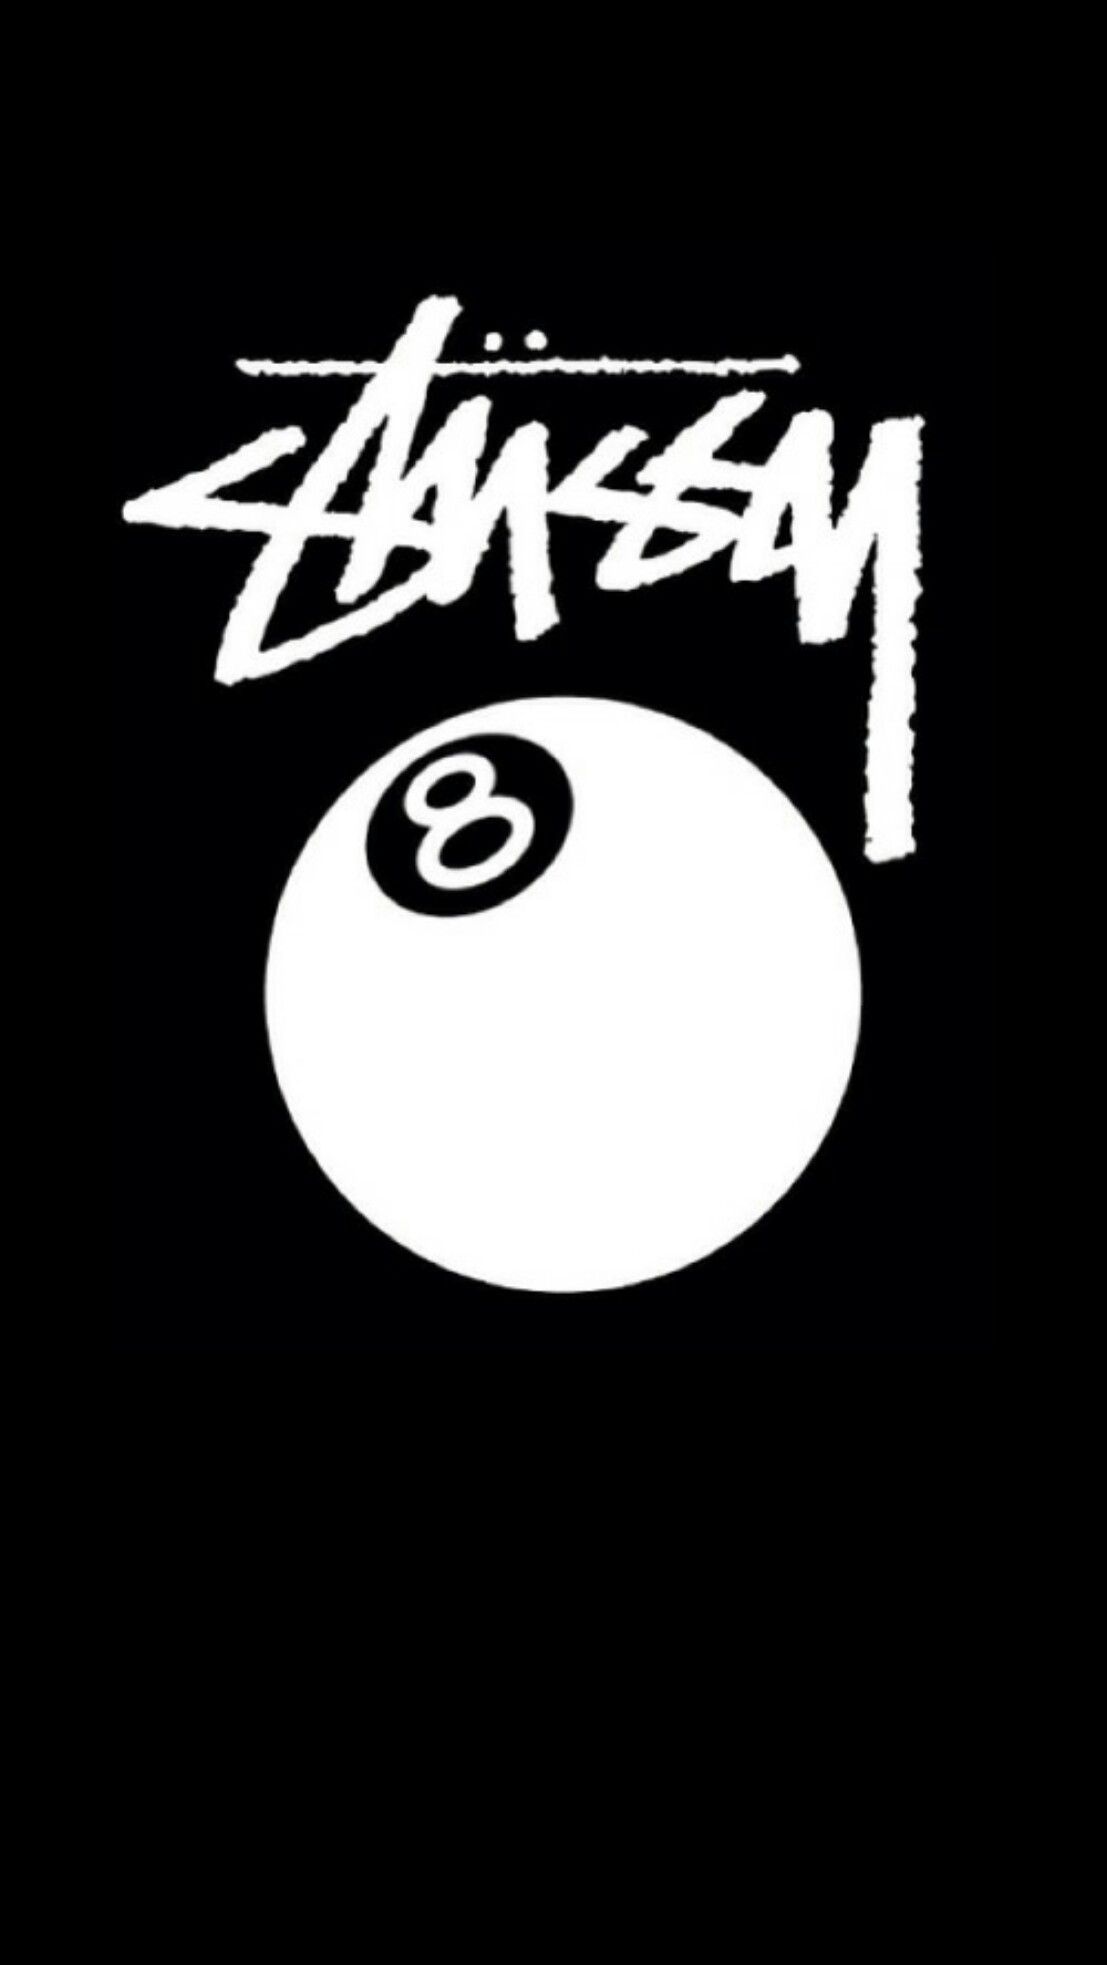 Stussy Black Wallpaper Android iPhone